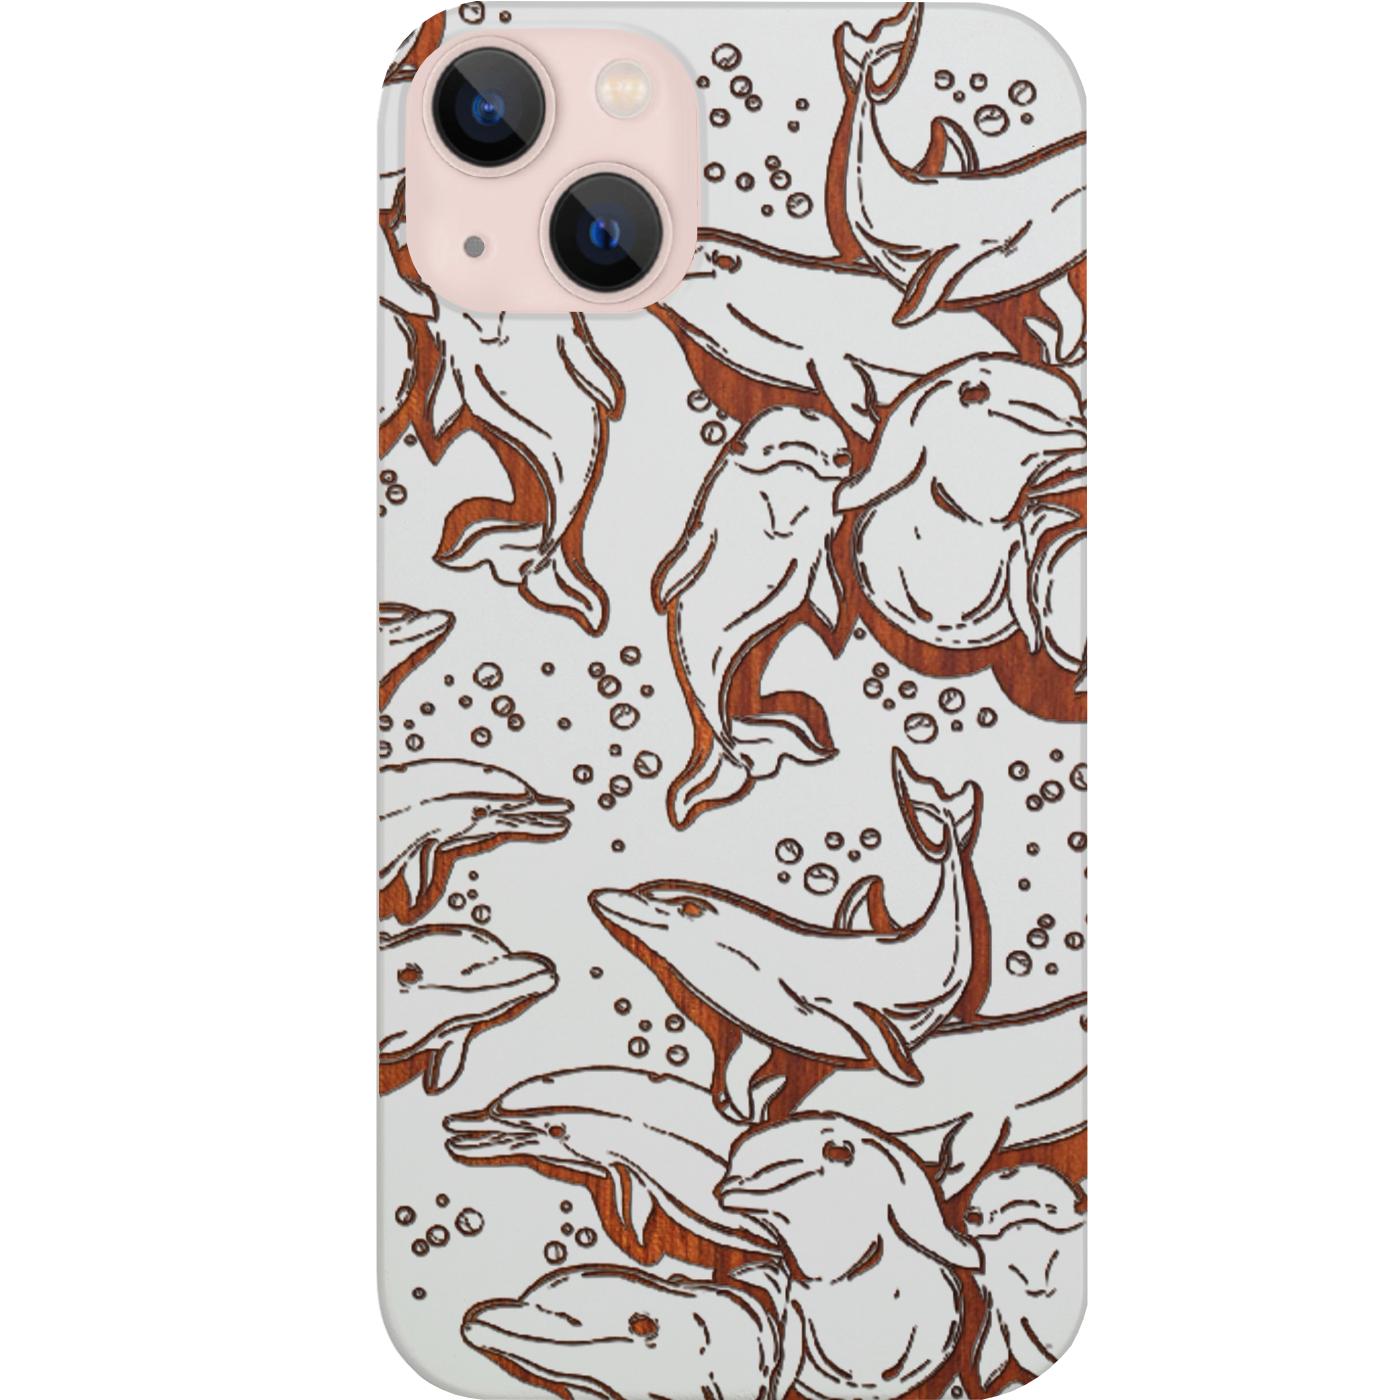 Dolphins - Engraved Phone Case